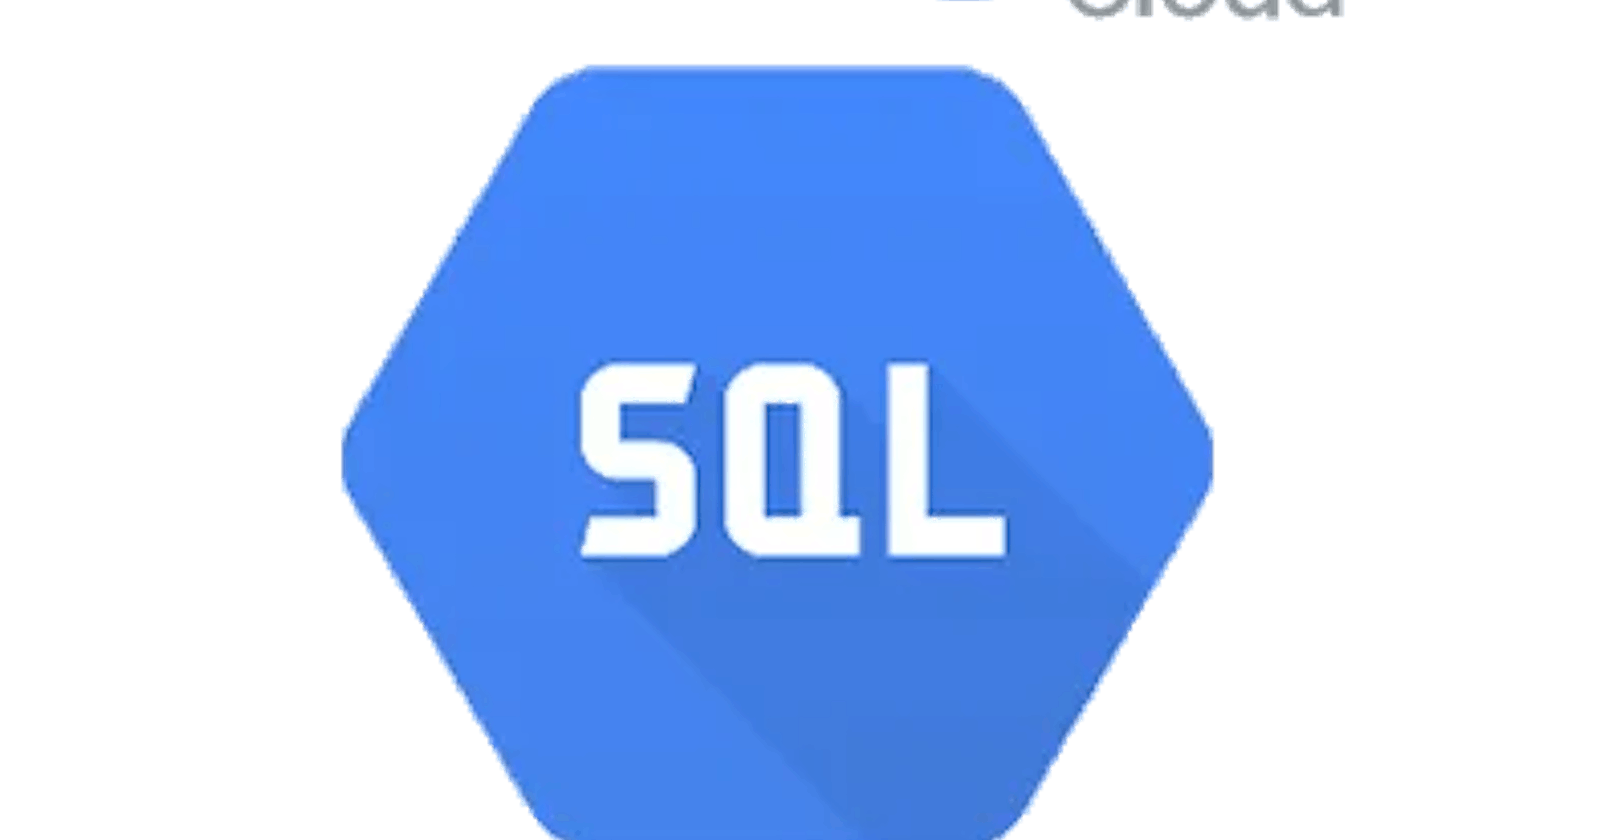 How to connect to a Google Cloud PostgreSQL 15.2 SQL instance remotely from Windows